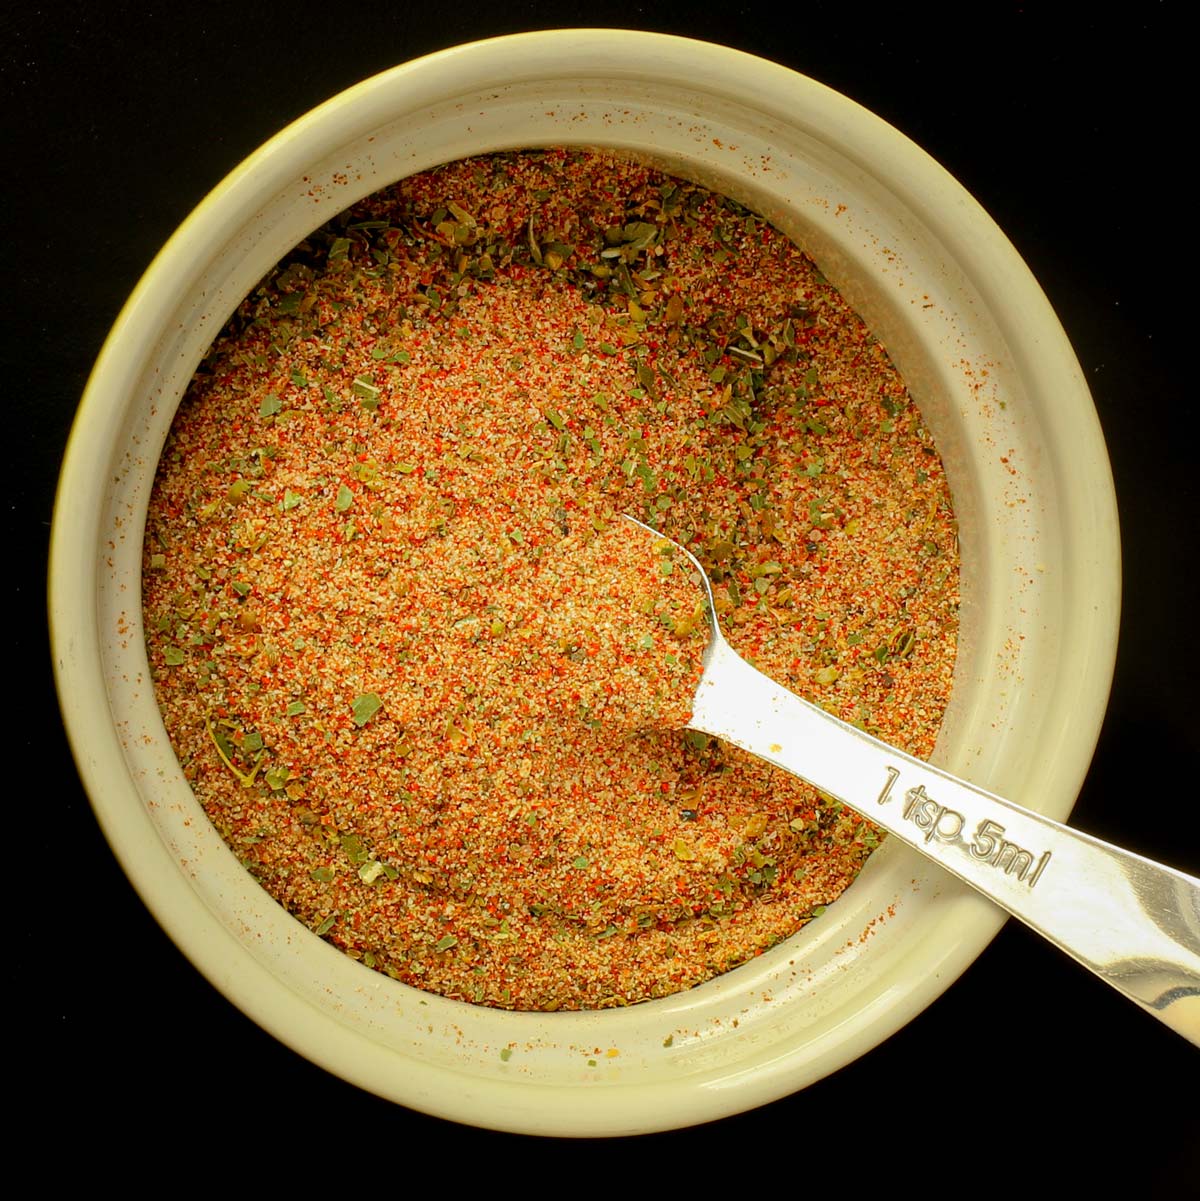 Jamie's spice mix in a small bowl.